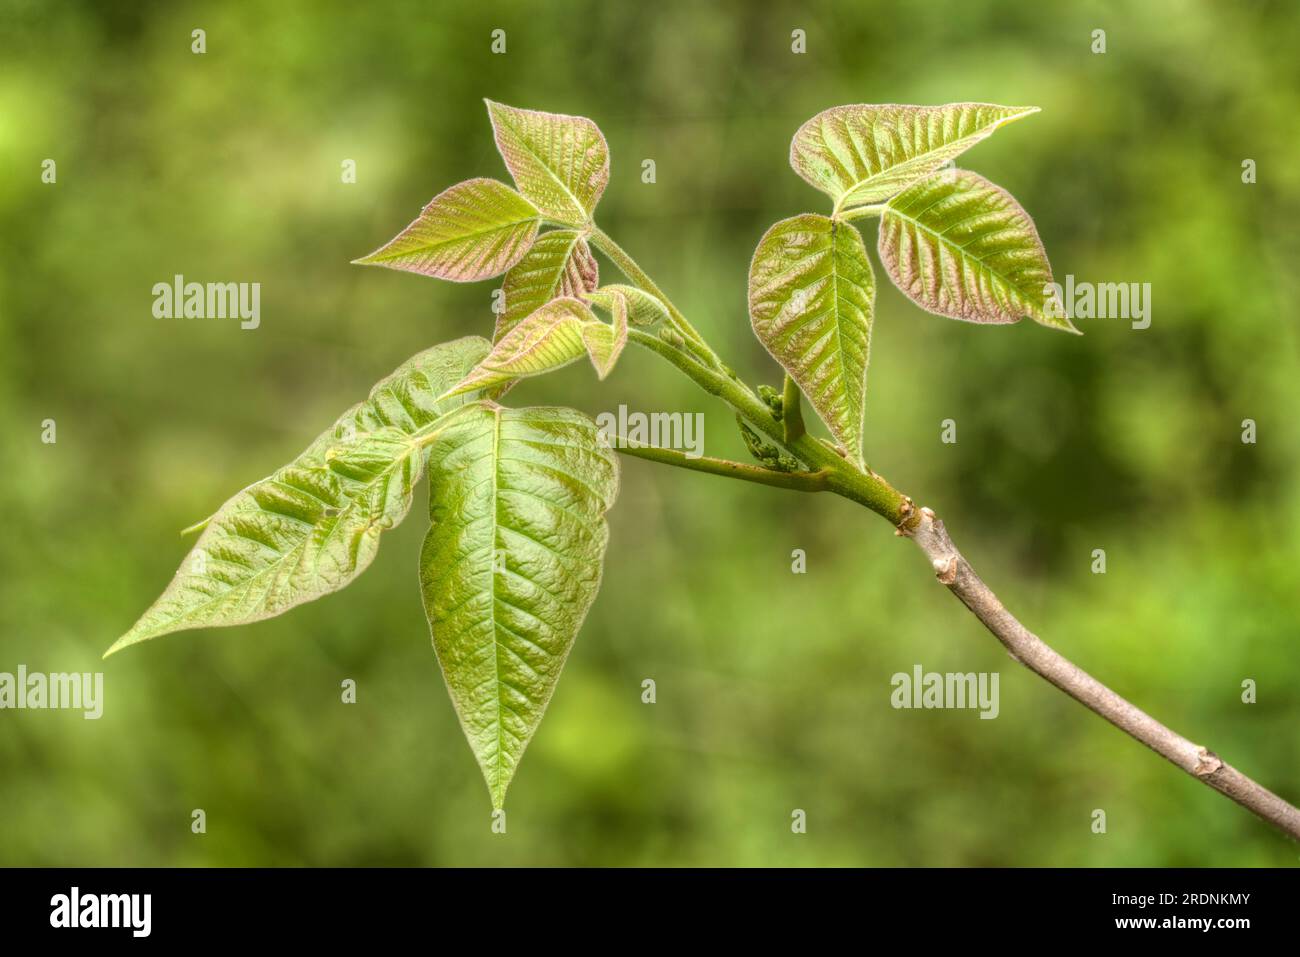 Poison Ivy (Toxicodendron radicans) a common toxic plant that causes skin rash can be identified by three leaf leaflets. Stock Photo